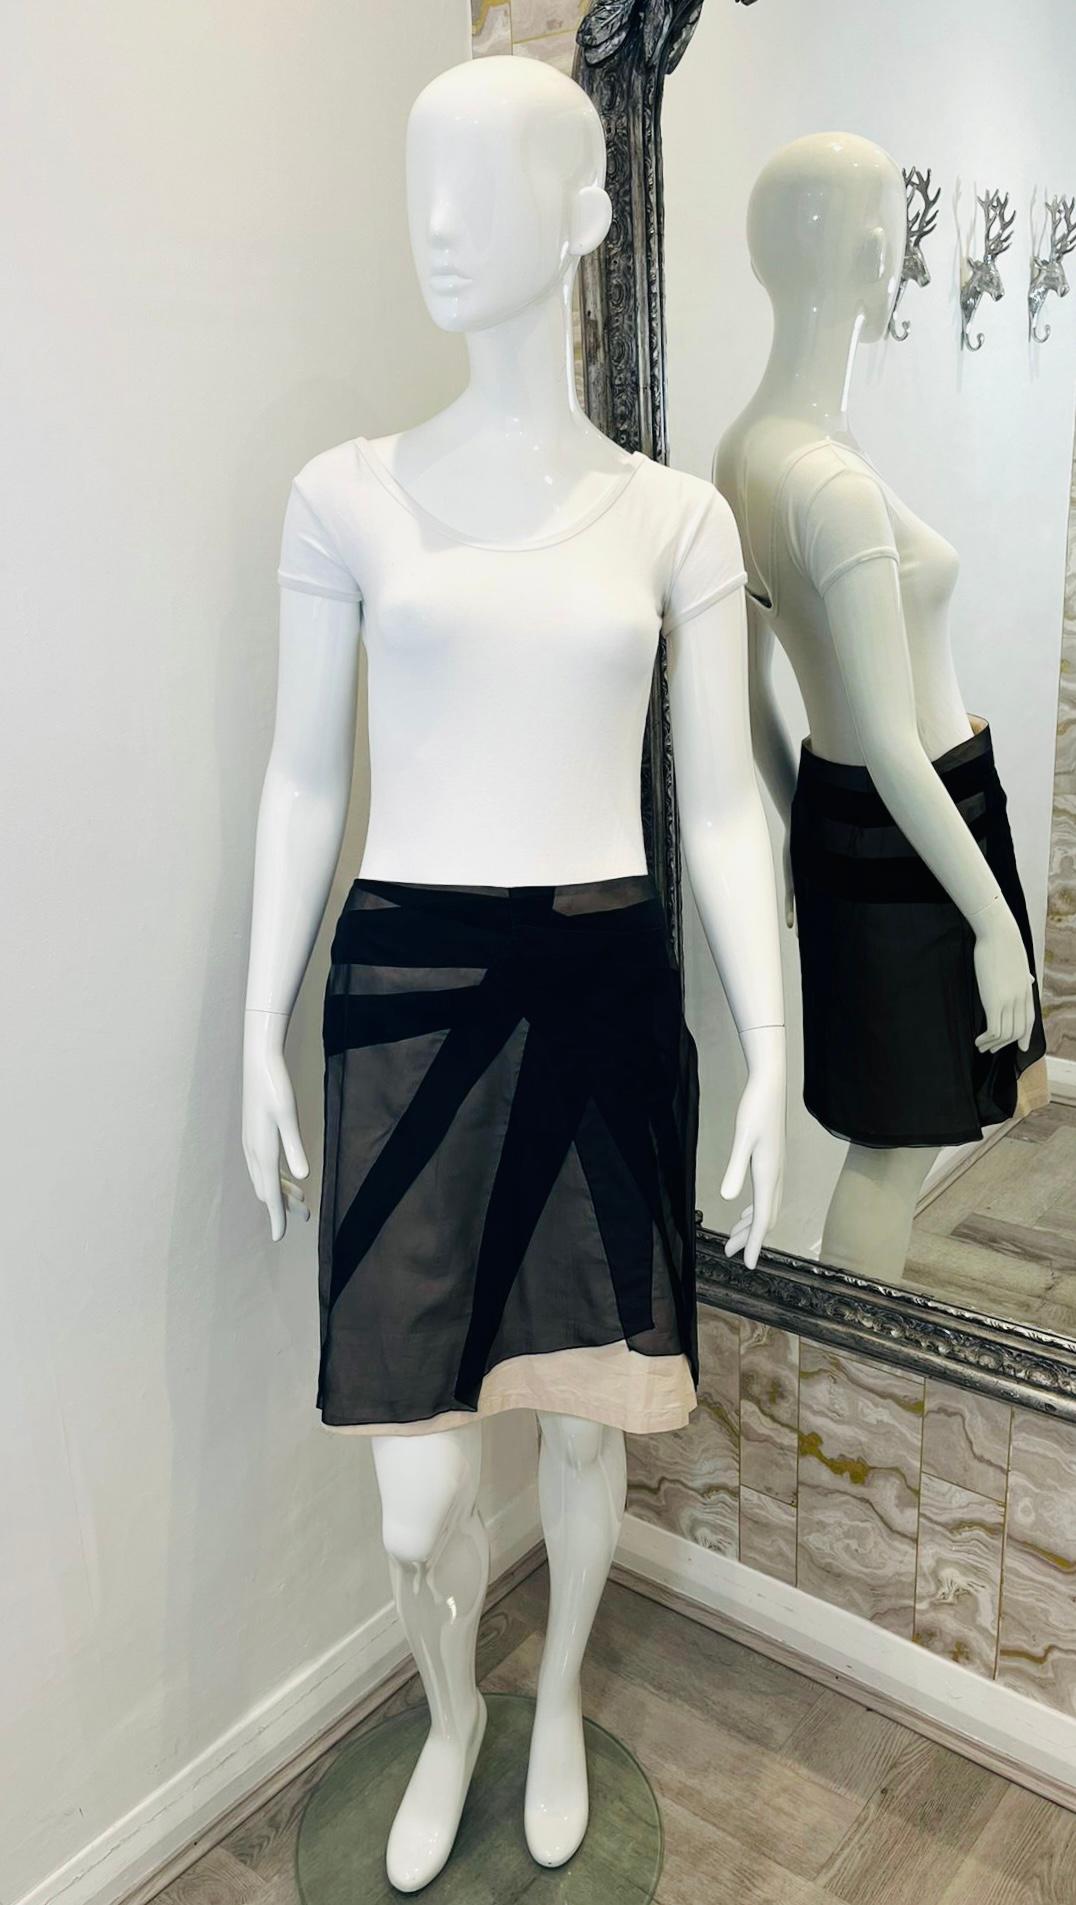 Bottega Veneta Silk & Cotton Layered Skirt

Ivory based skirt designed with sheer layer detailed with black, wide abstract stripes.

Featuring above-knee length and concealed zip fastening to the side.

Size – 40IT

Condition – Very